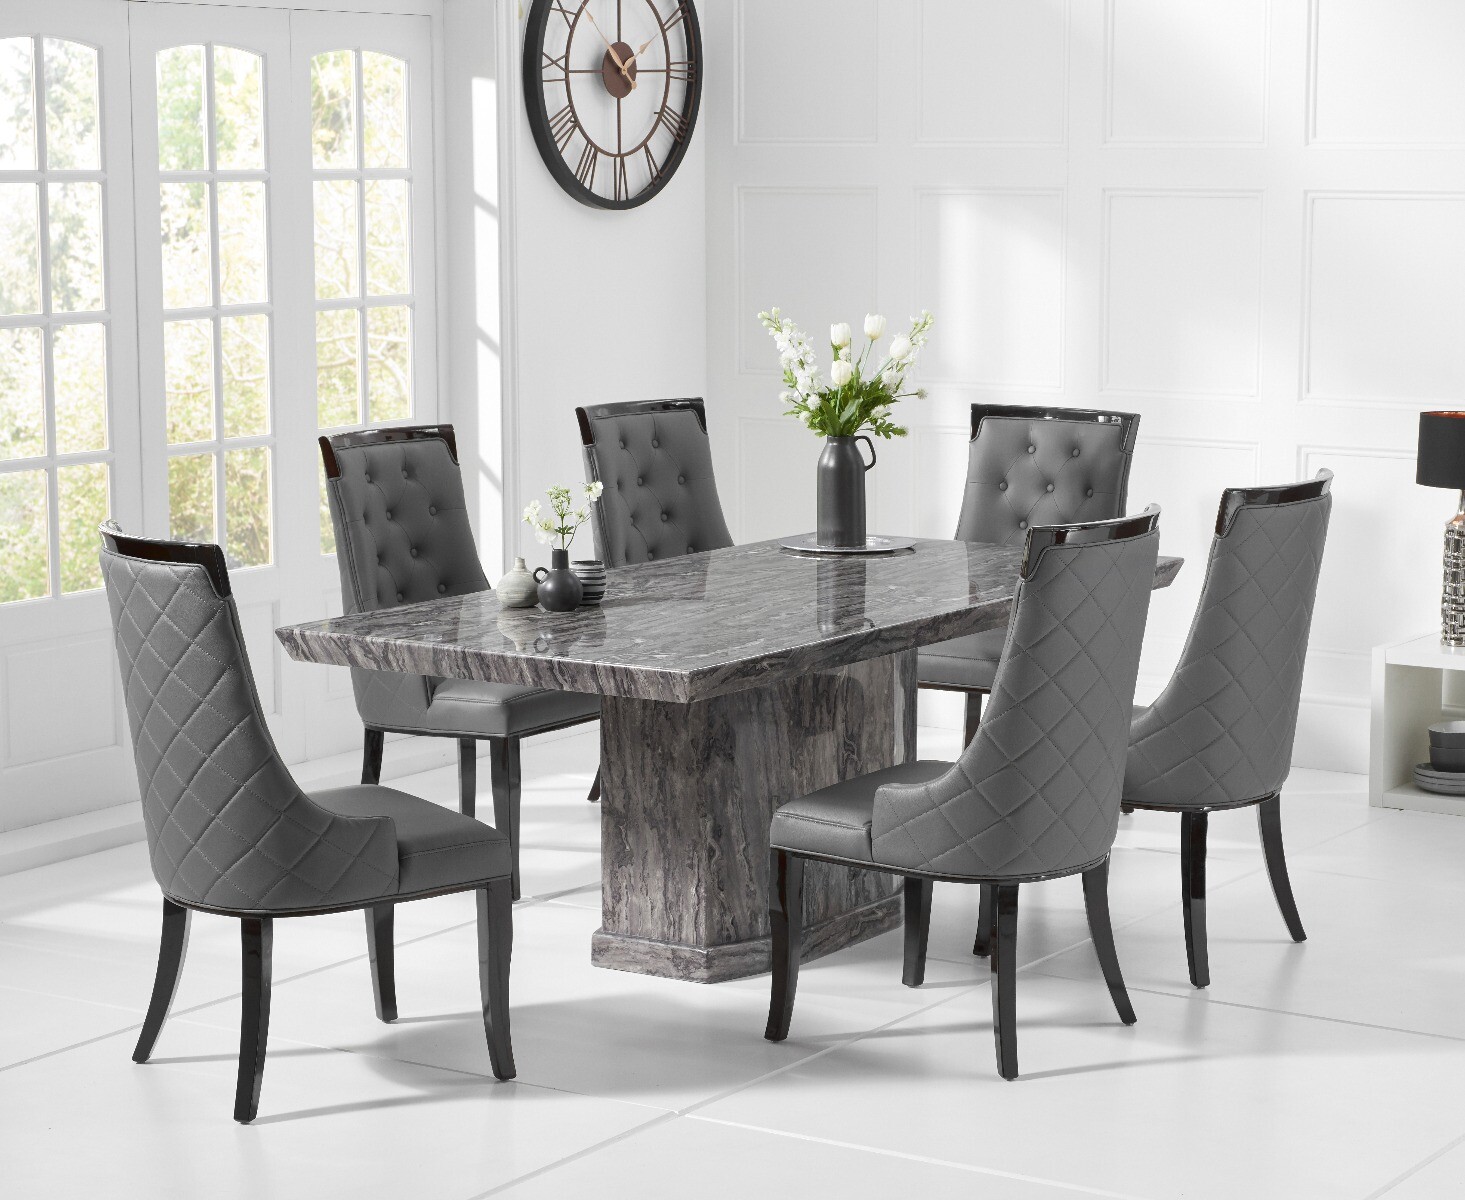 Carvelle 200cm Grey Pedestal Marble Dining Table With 6 Cream Francesca Chairs